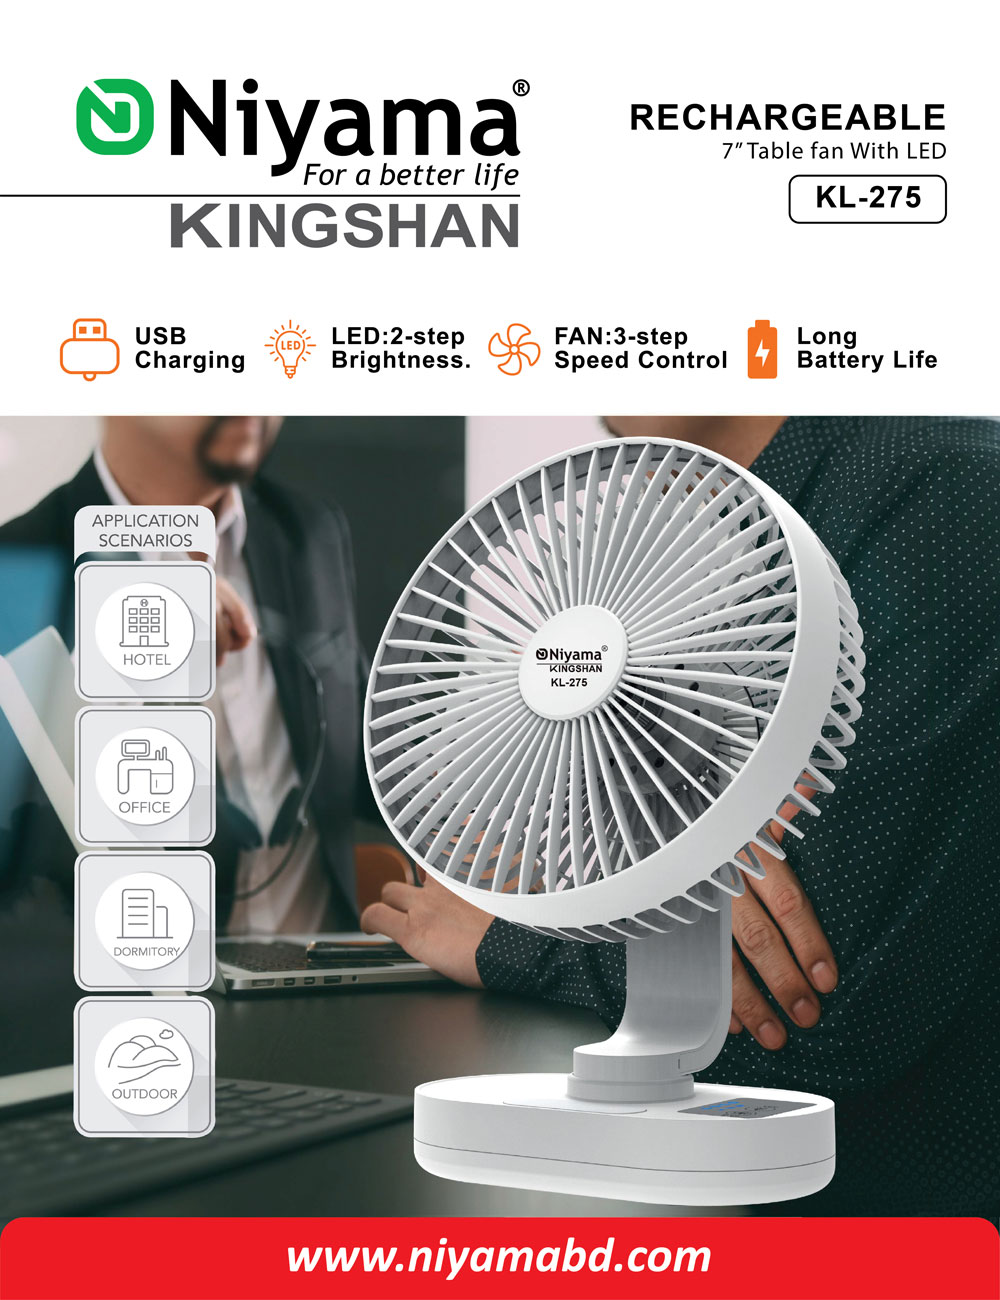 Stay Cool Anywhere You Go with the KL-275 Rechargeable Mini Fan!